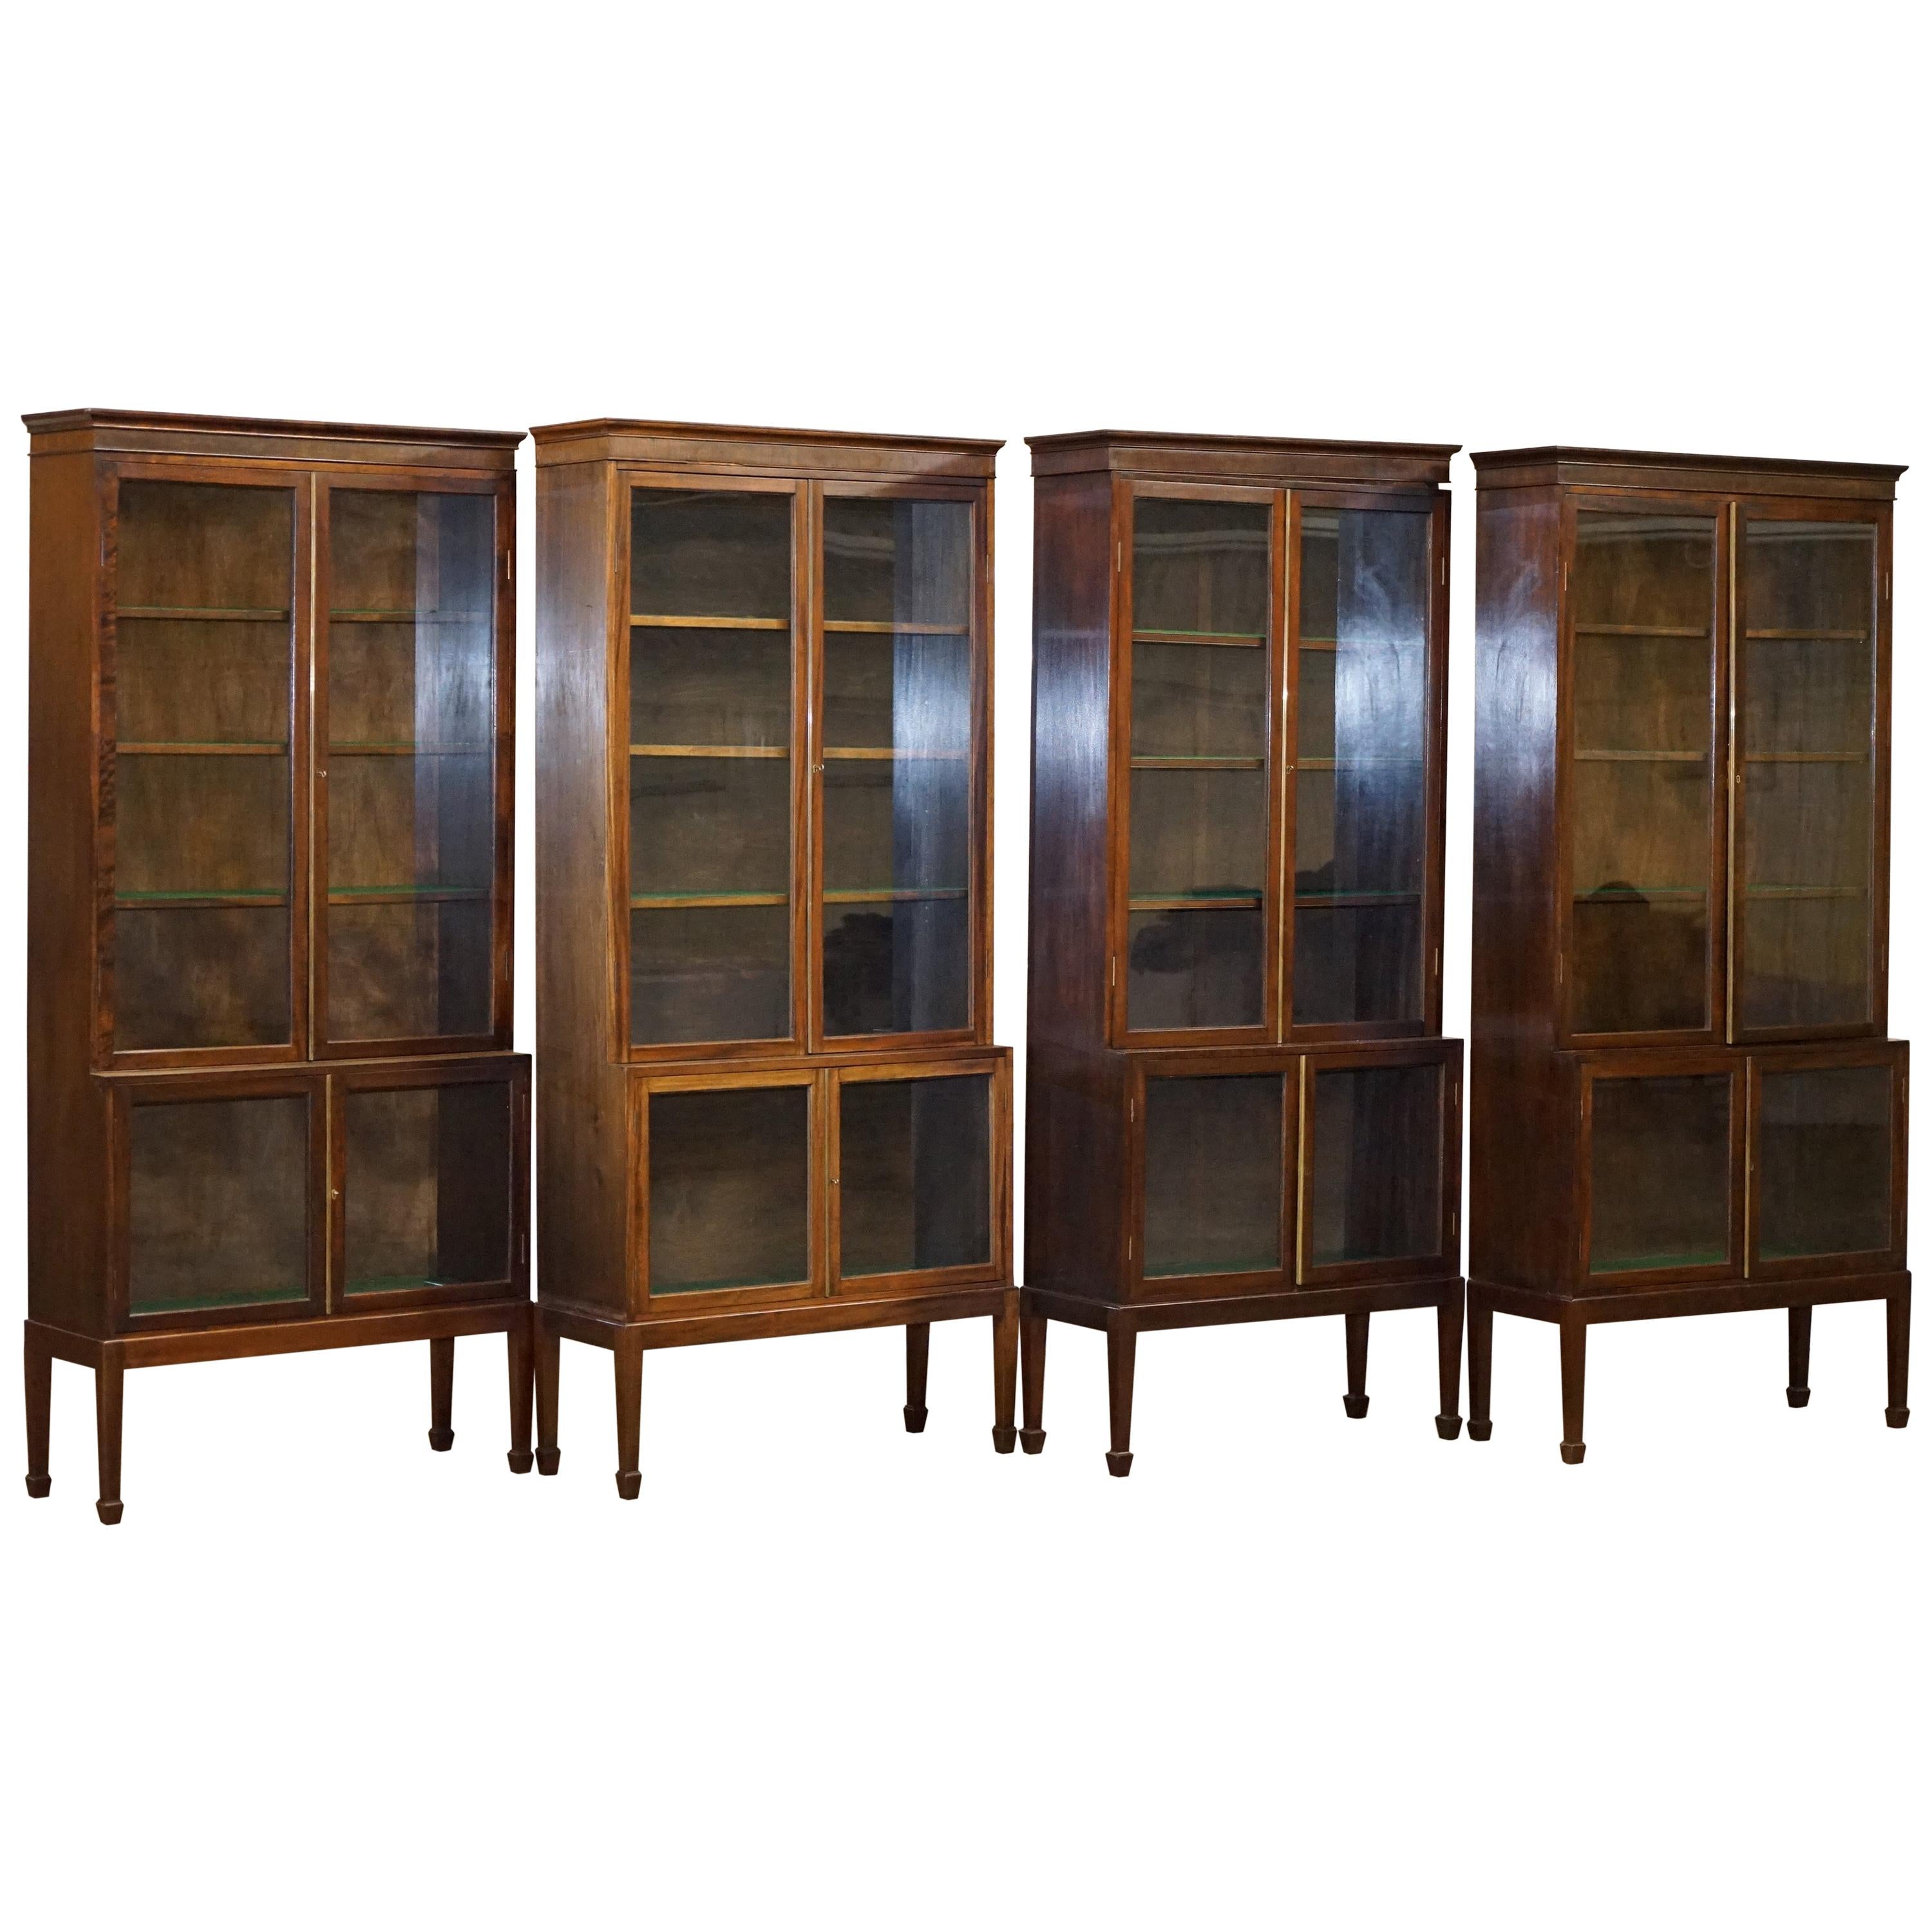 Rare Set of Four Oxford Library Victorian Bookcases in Hardwood 412cm Wide